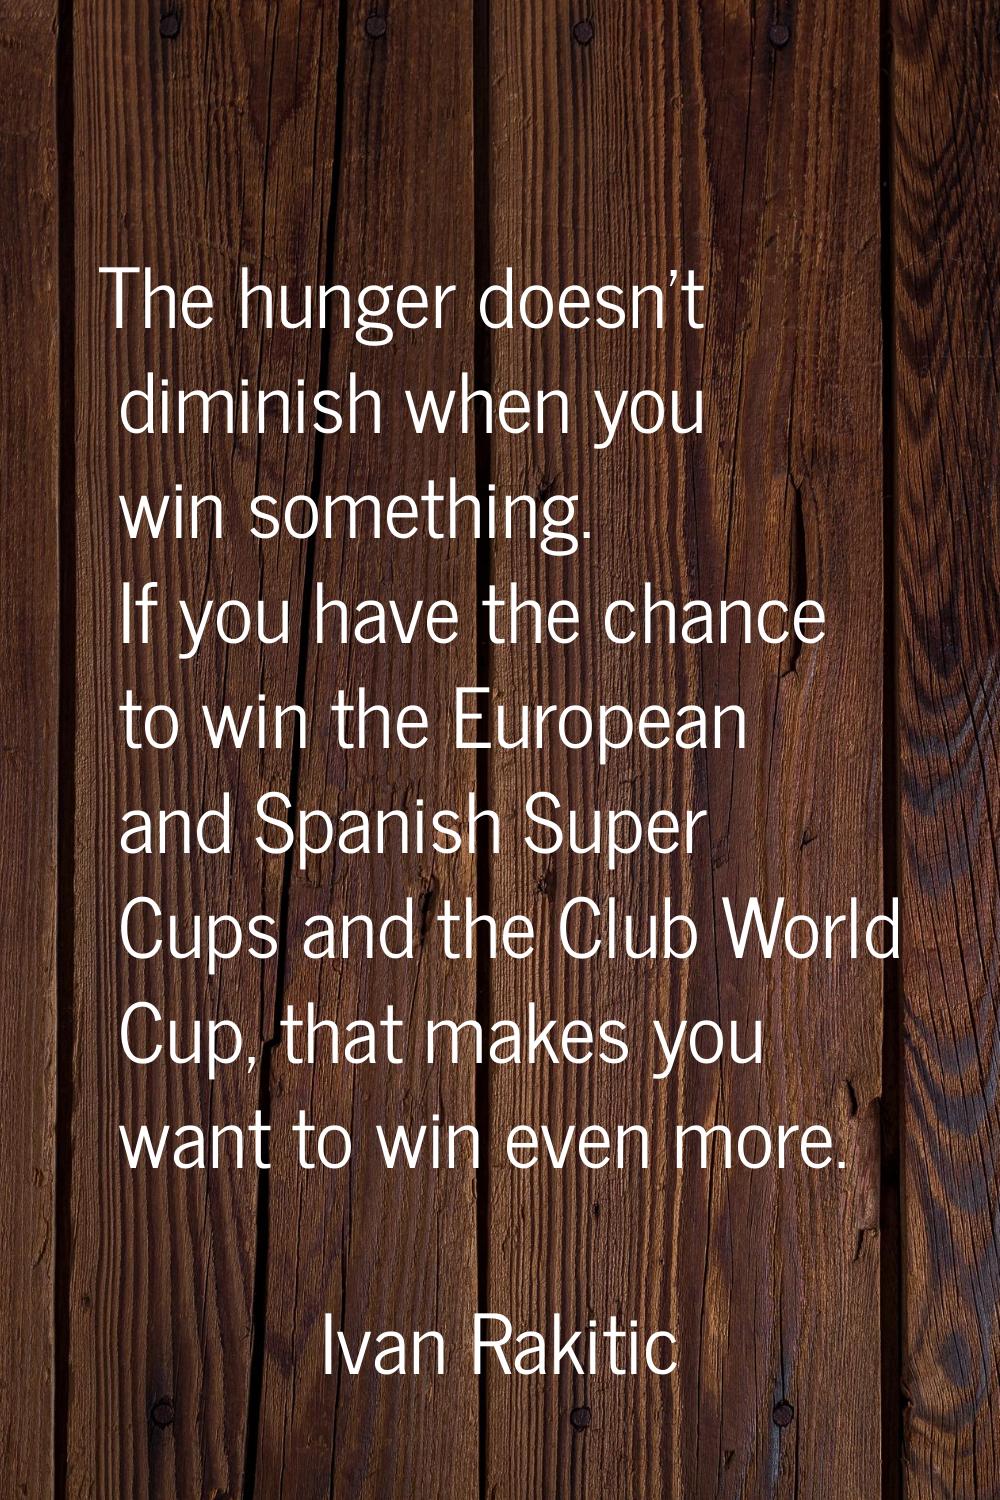 The hunger doesn't diminish when you win something. If you have the chance to win the European and 